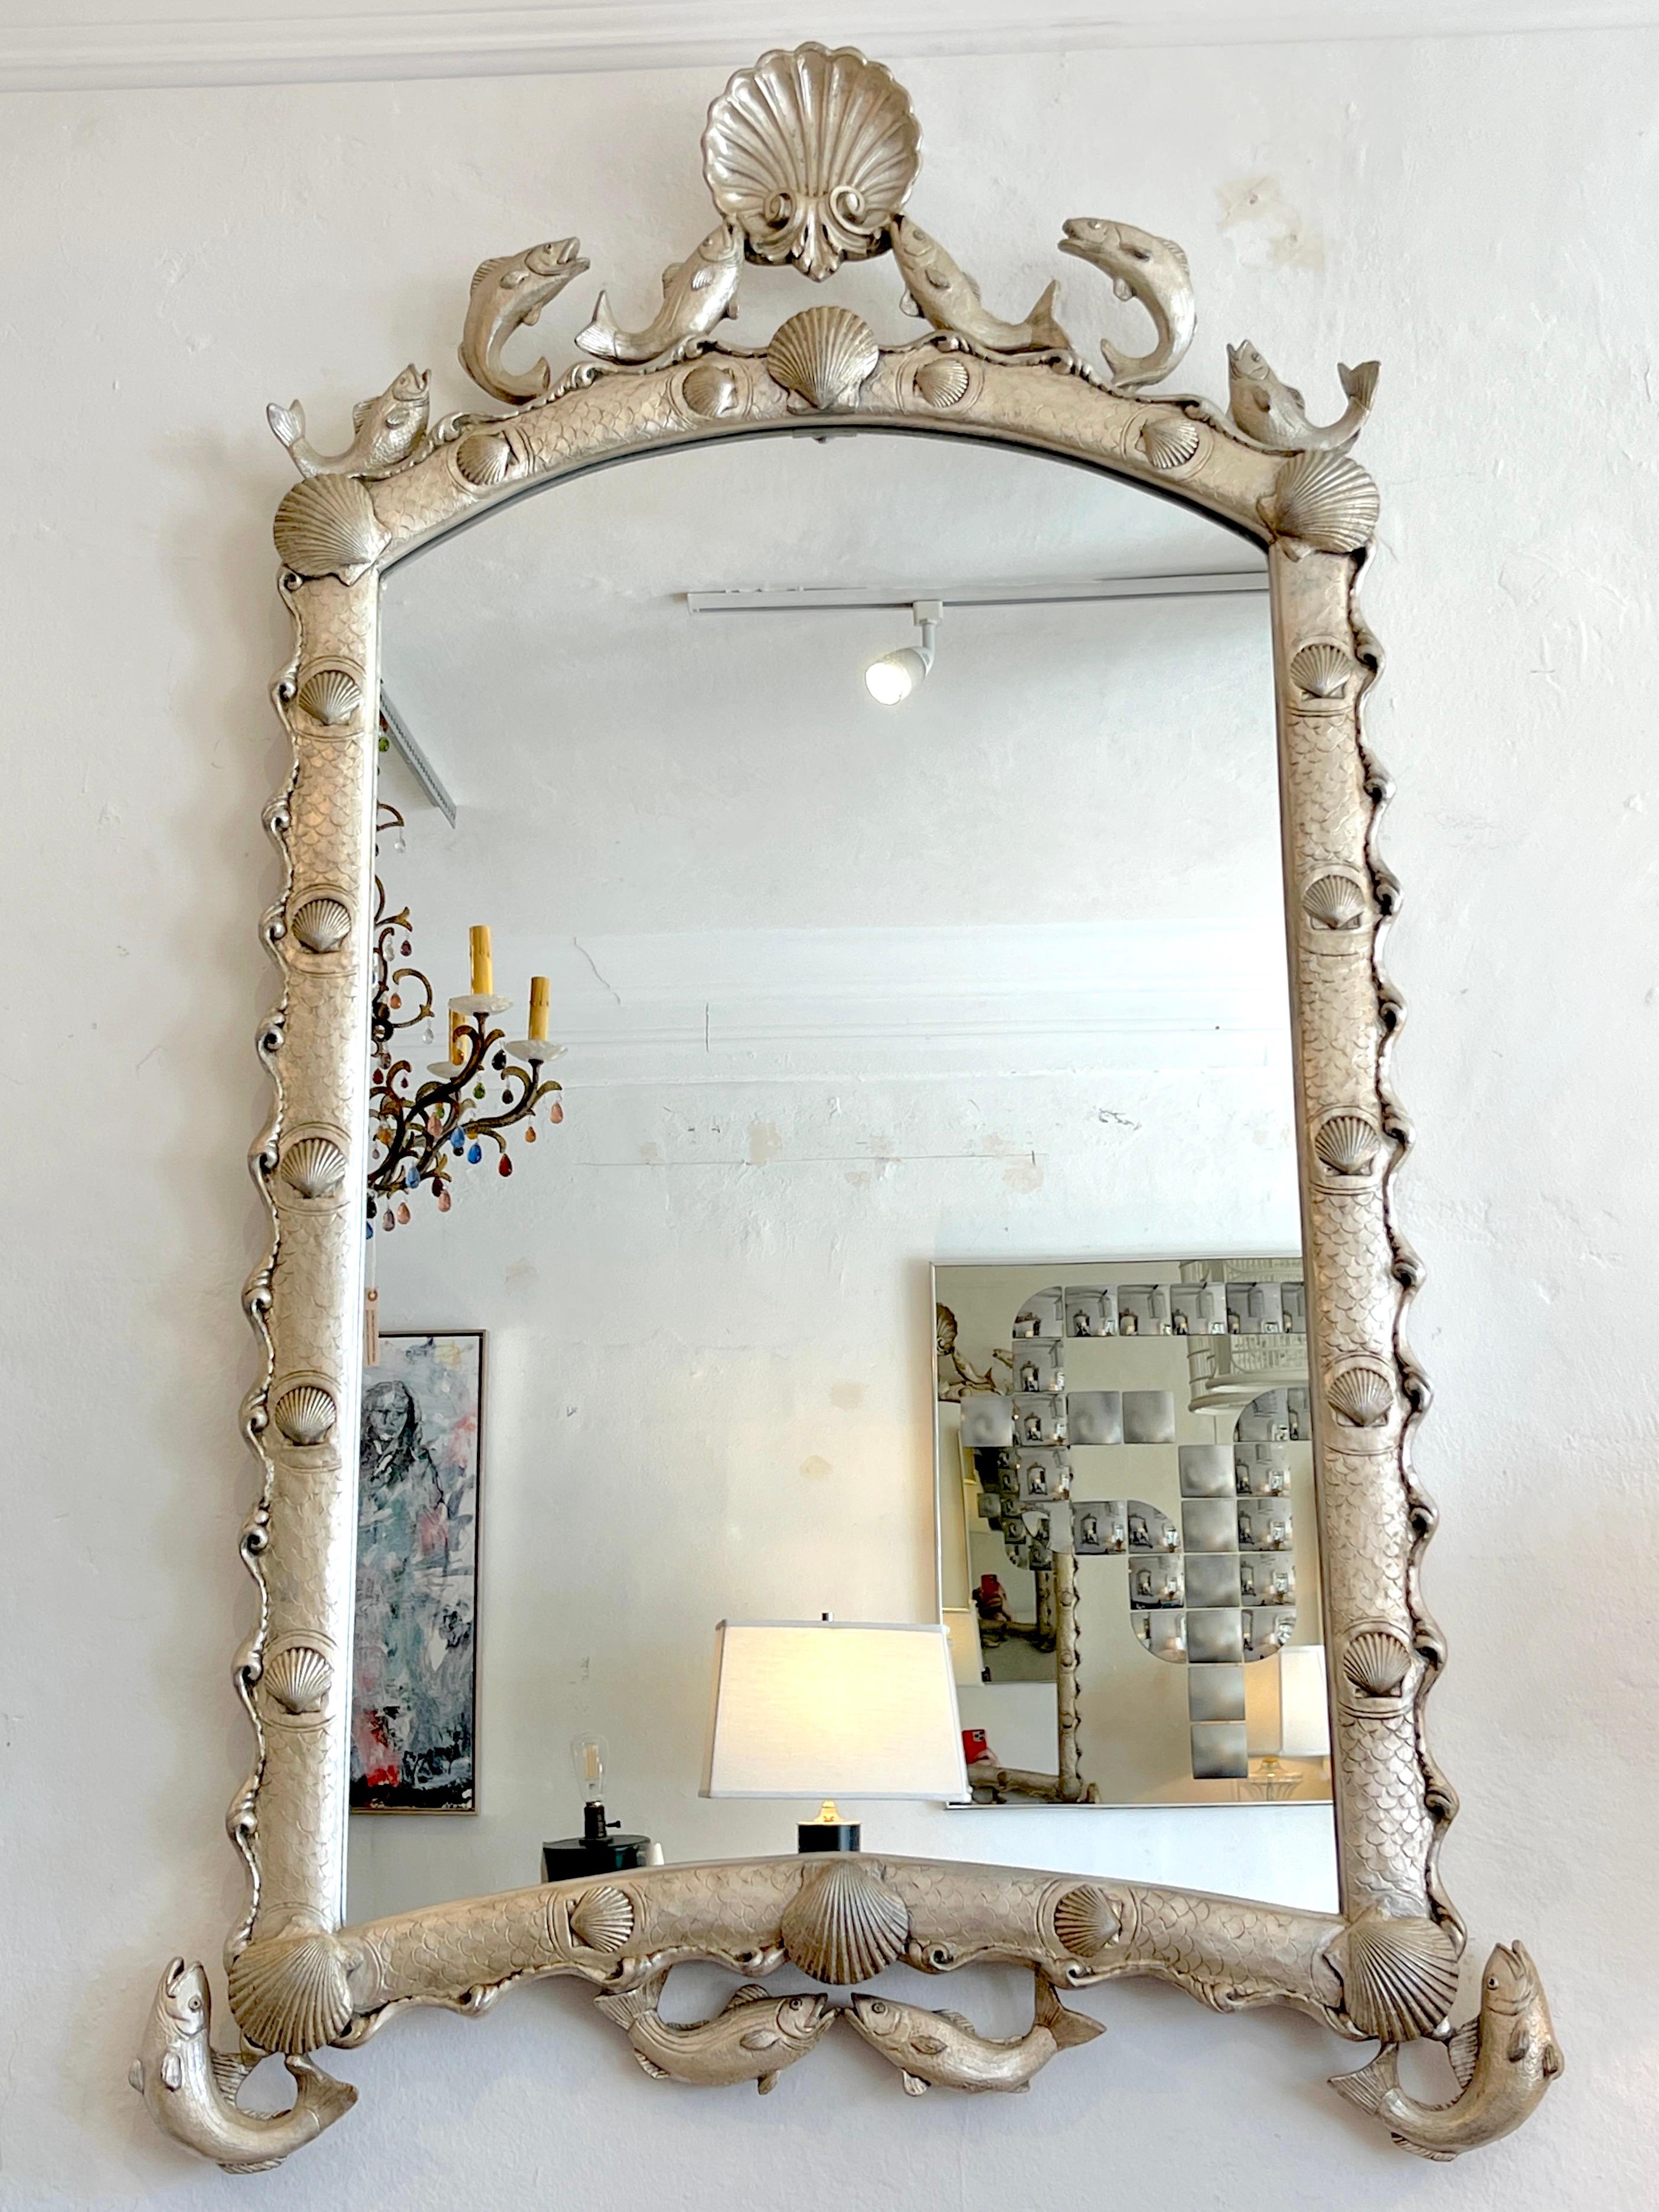 Hollywood Regency style silver-Leaf 'Martha's Vineyard' mirror by Carvers Guild 
USA, Circa 1990s

A stunning vintage example, of Martha's Vineyard' mirror by Carvers Guild silver leaf mirror The mirror decorated scalloped mirror with ocean sea